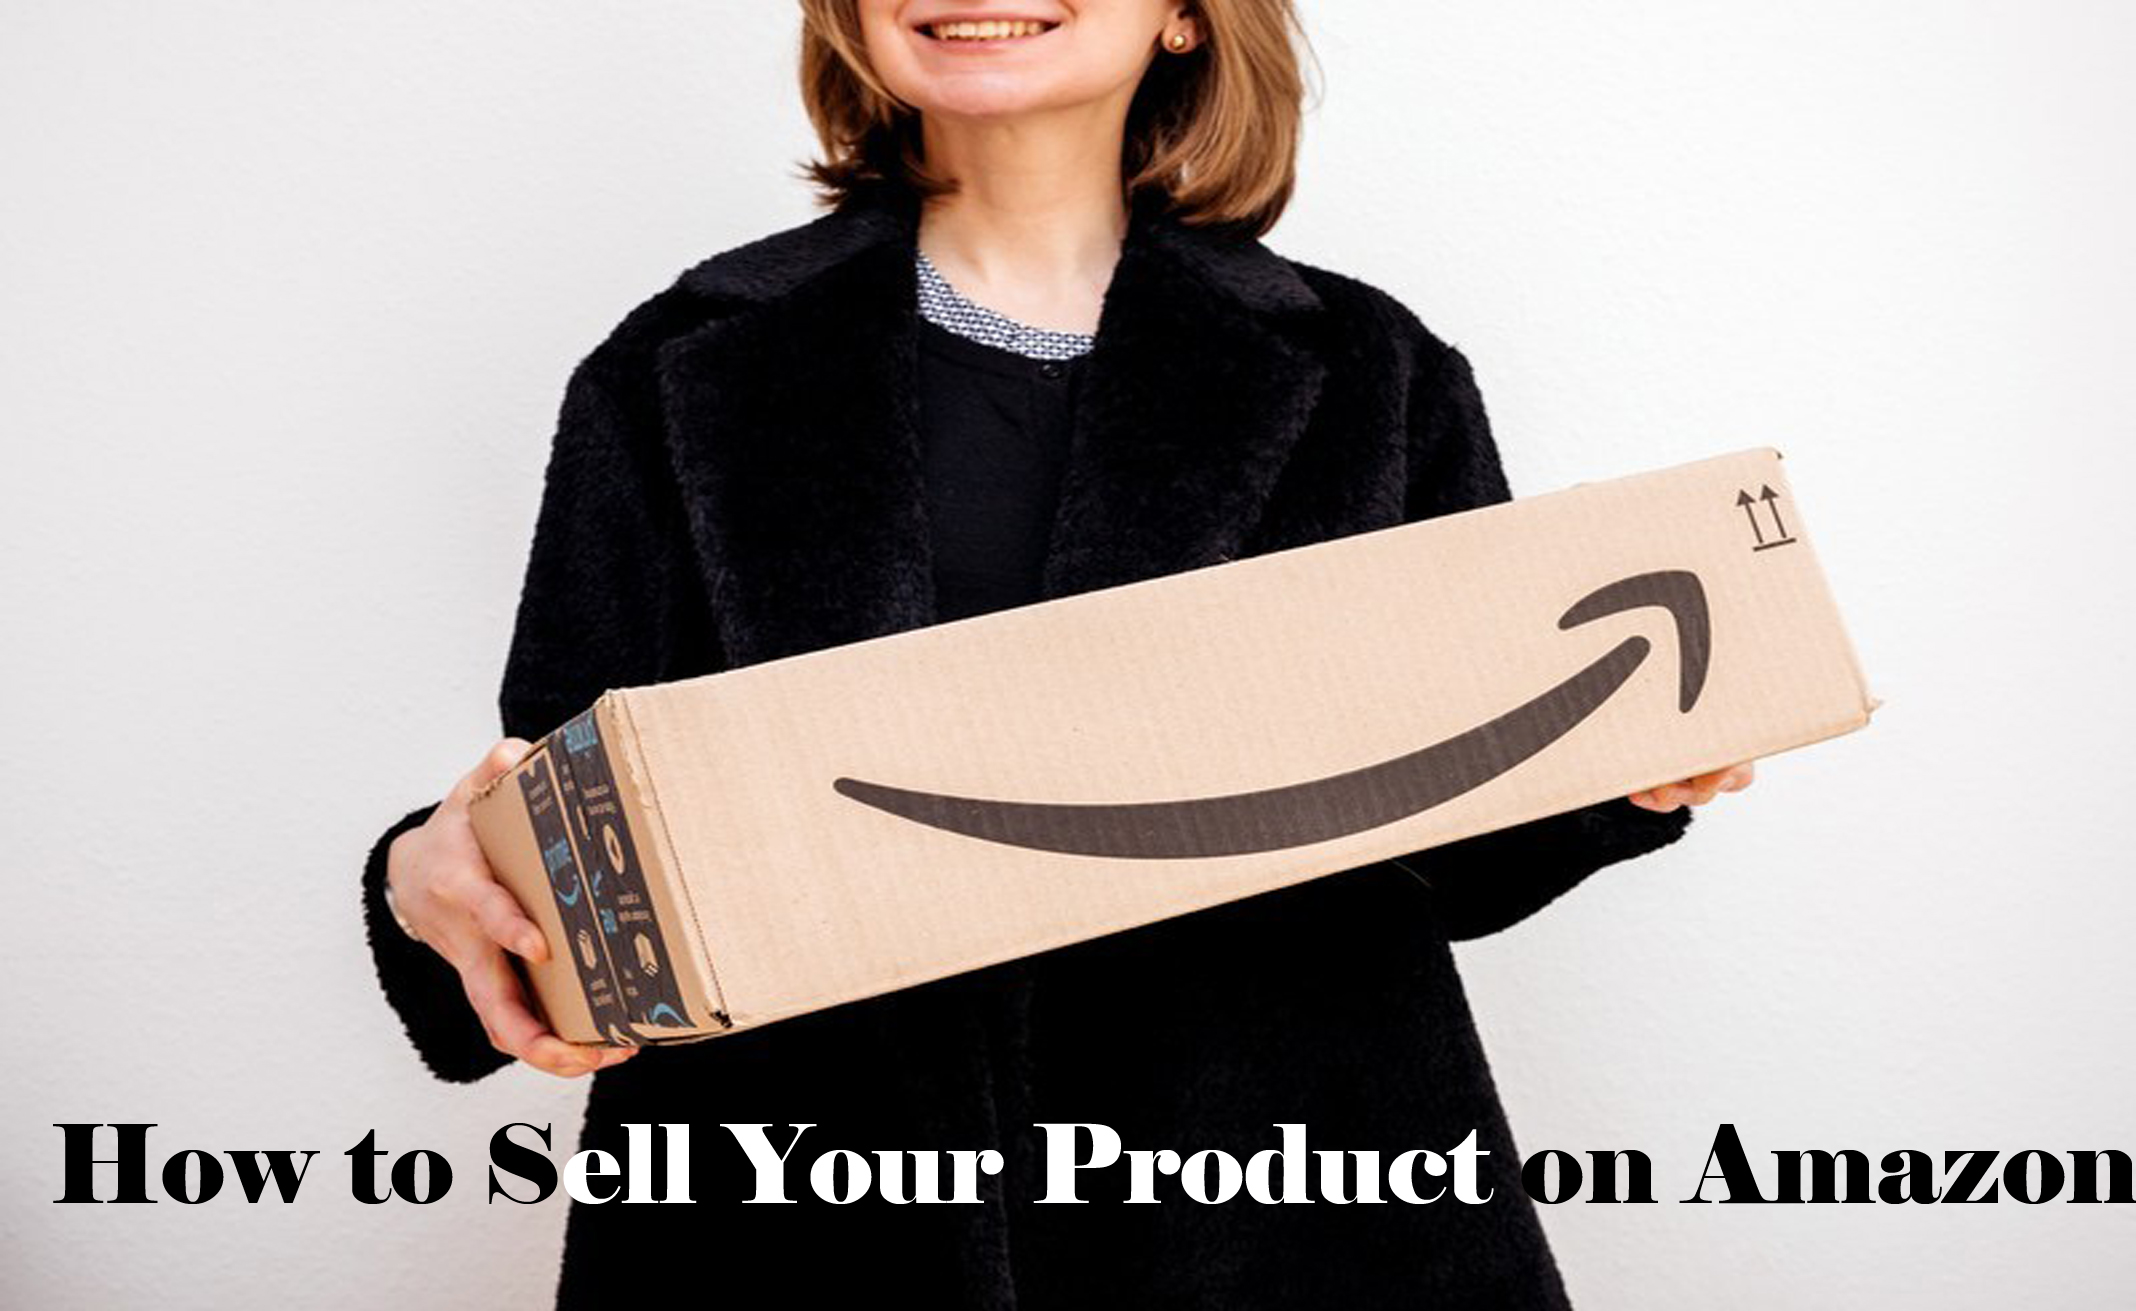 How to Sell Your Product on Amazon - How do You Sell Your Product on Amazon